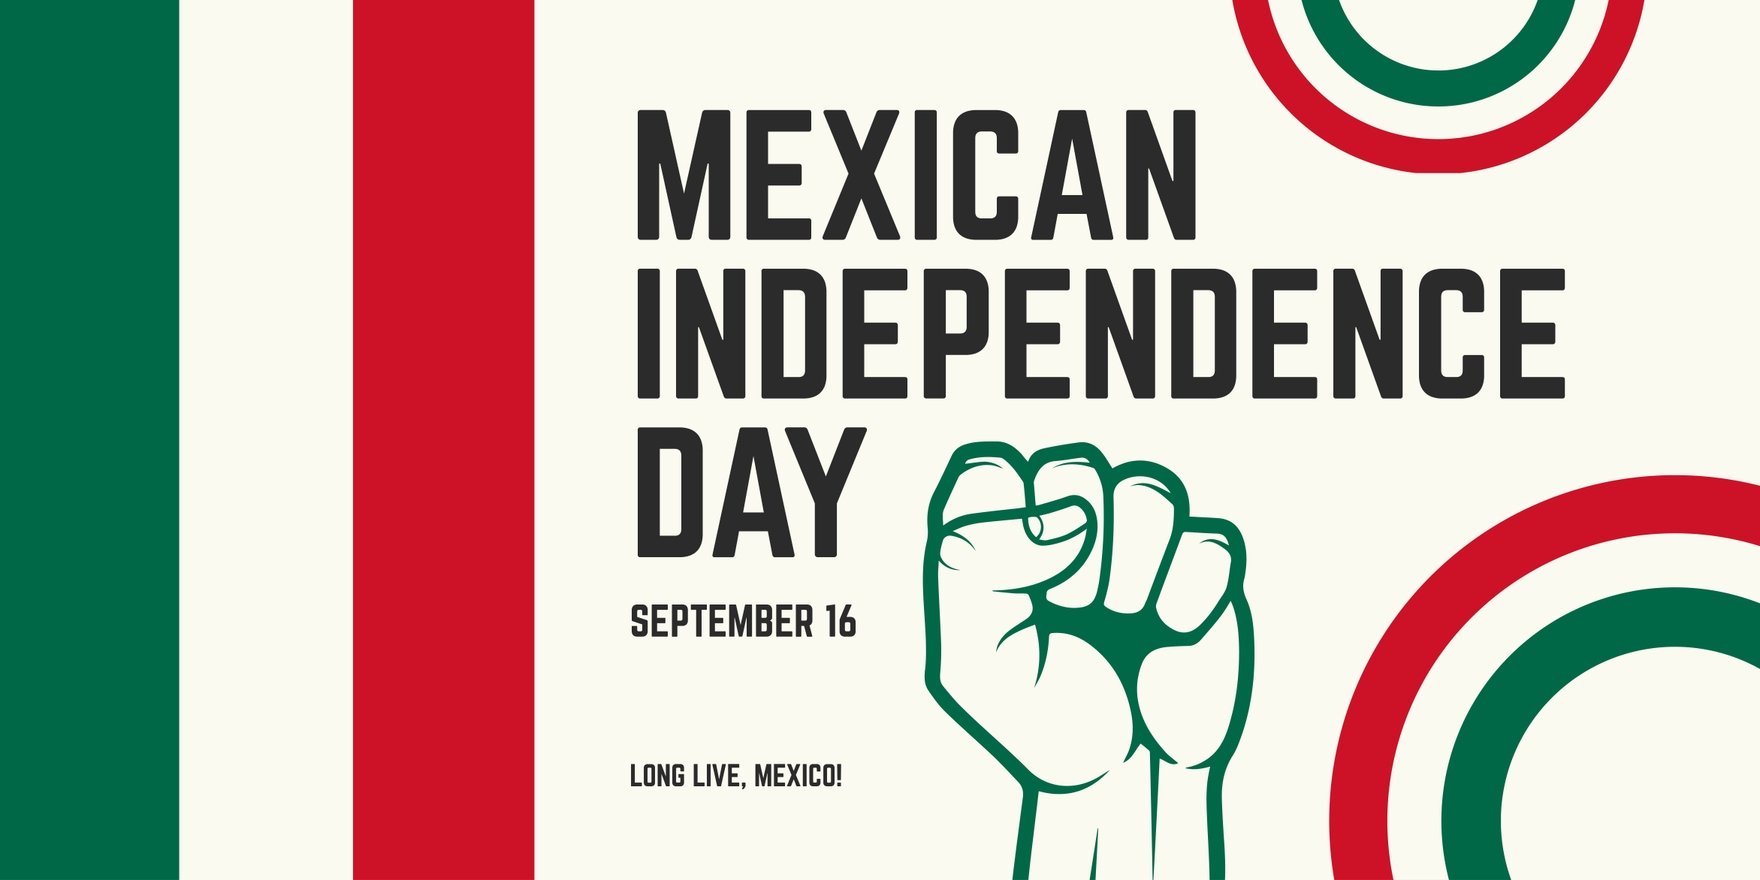 Free Modern Mexican Independence Day Banner in Illustrator, PSD, EPS, SVG, JPG, PNG